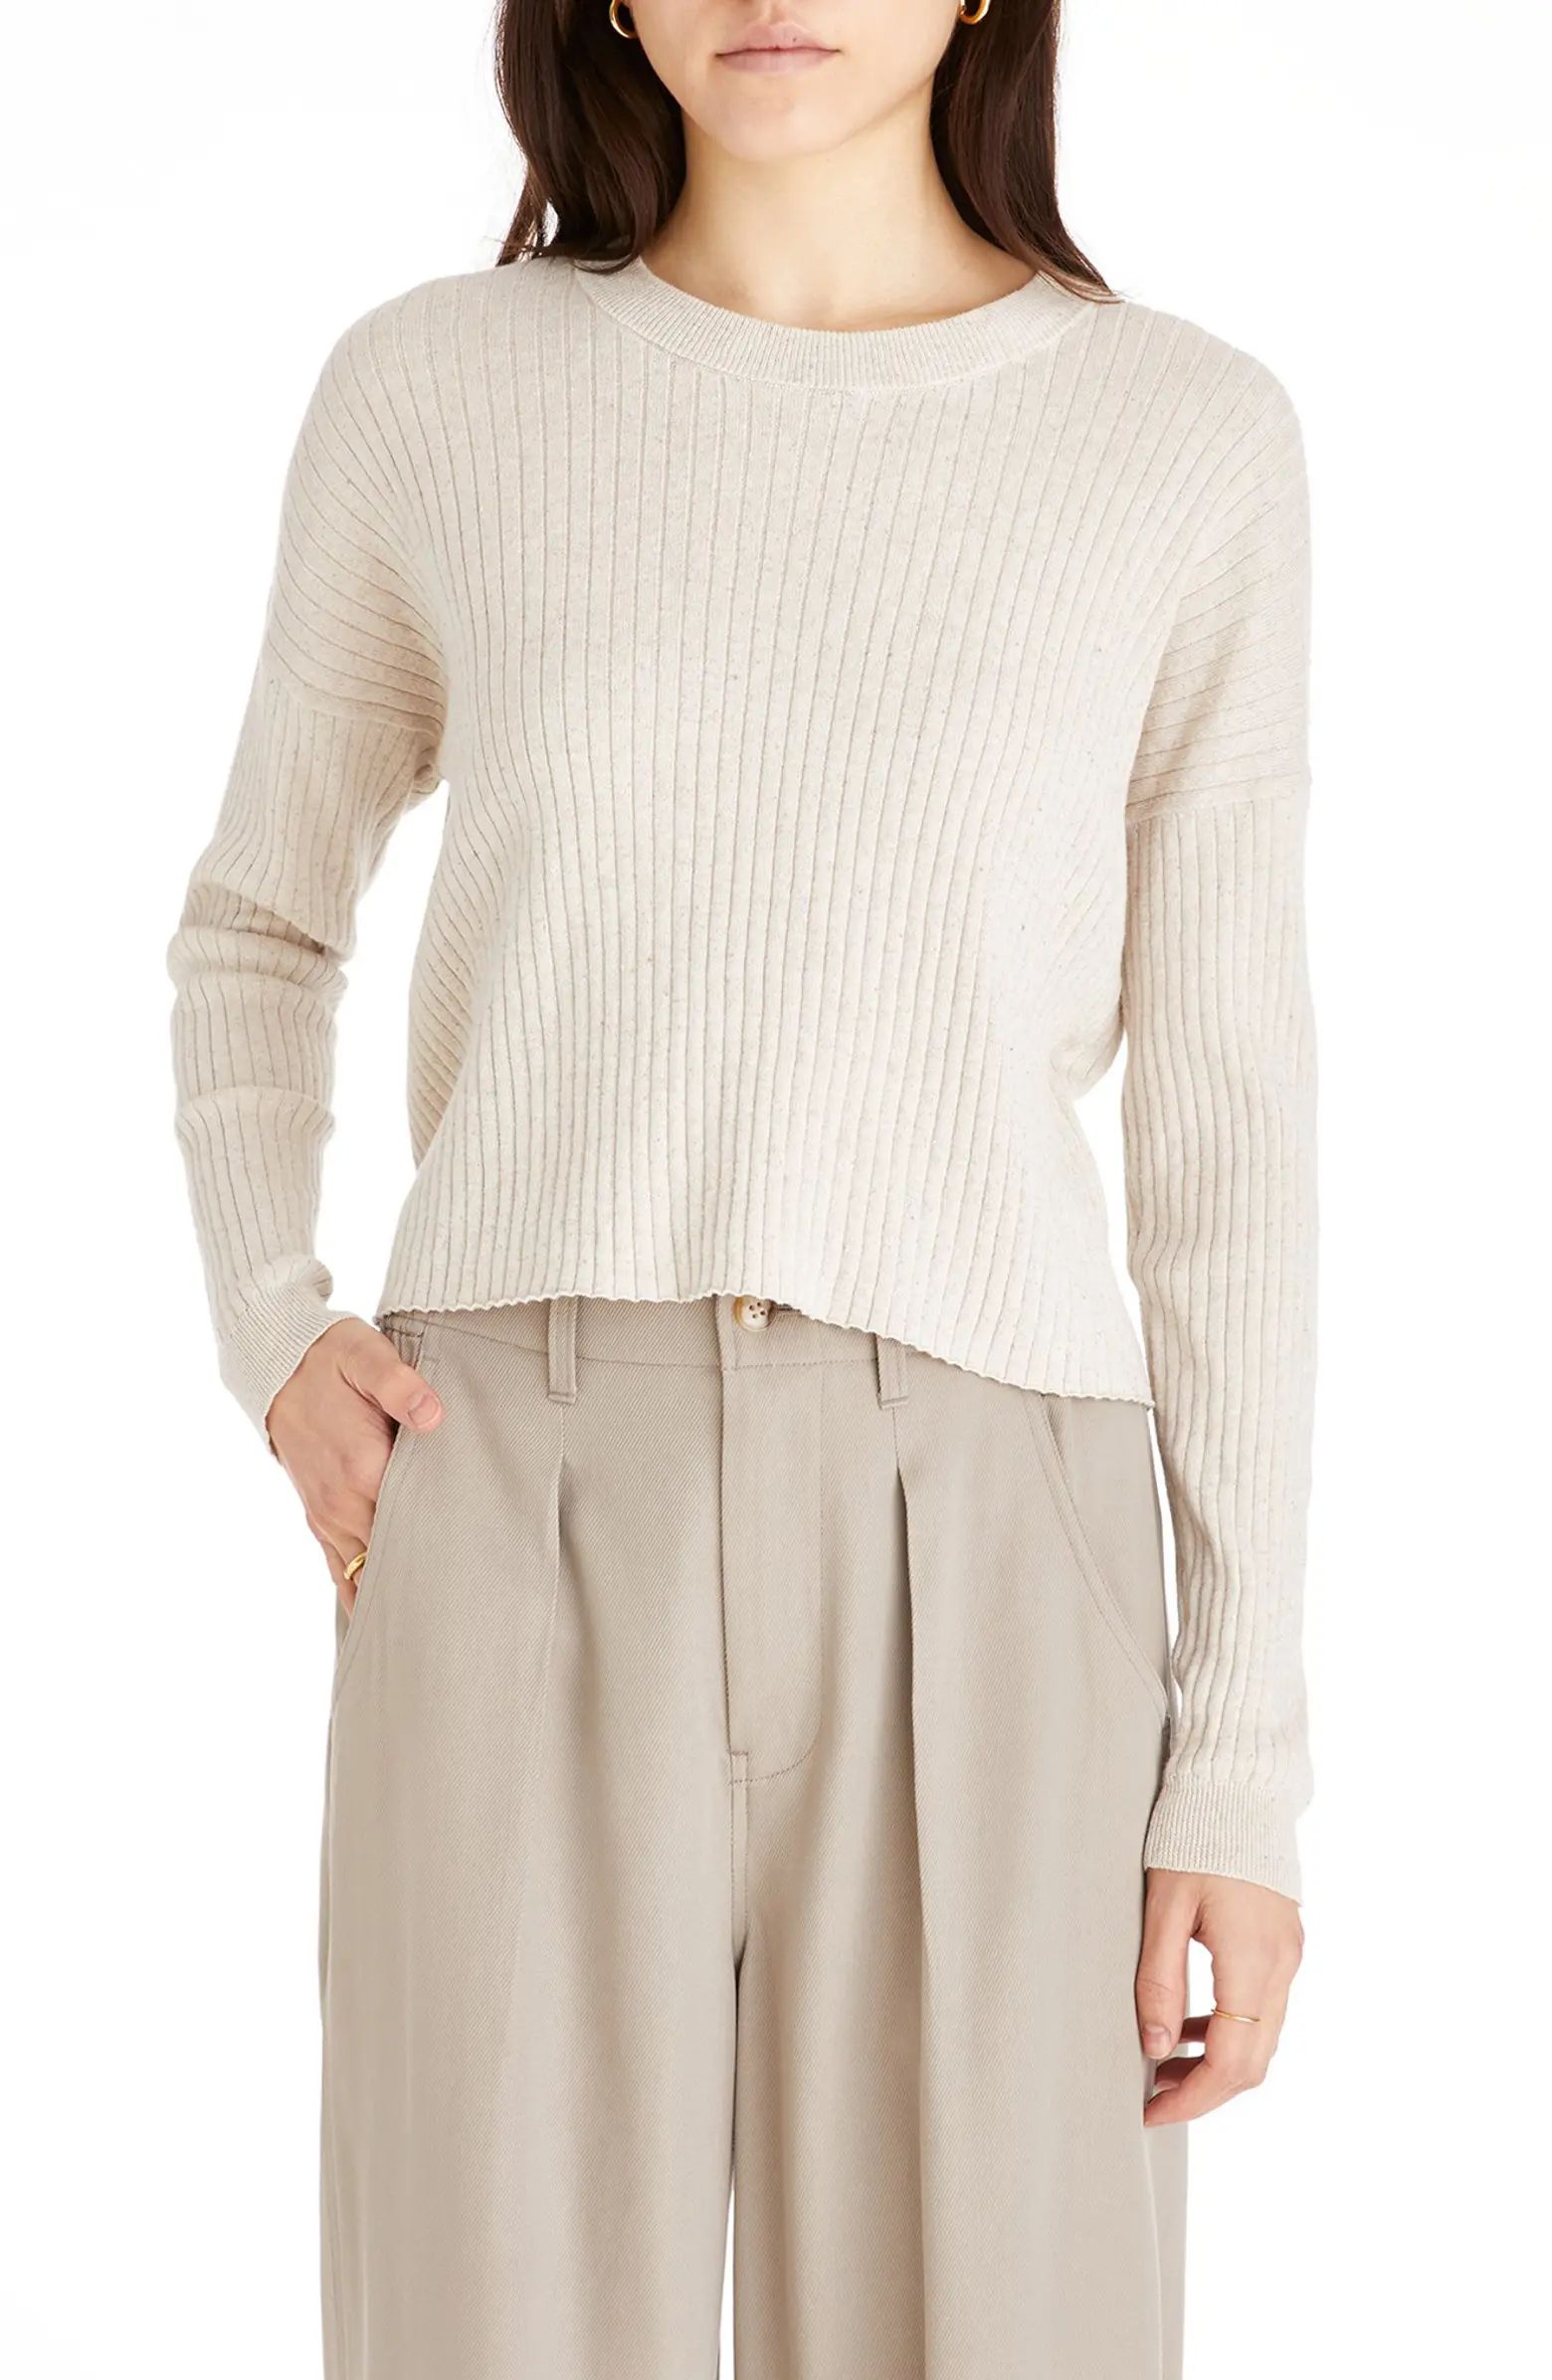 Donegal Lawson Crop Sweater | Nordstrom